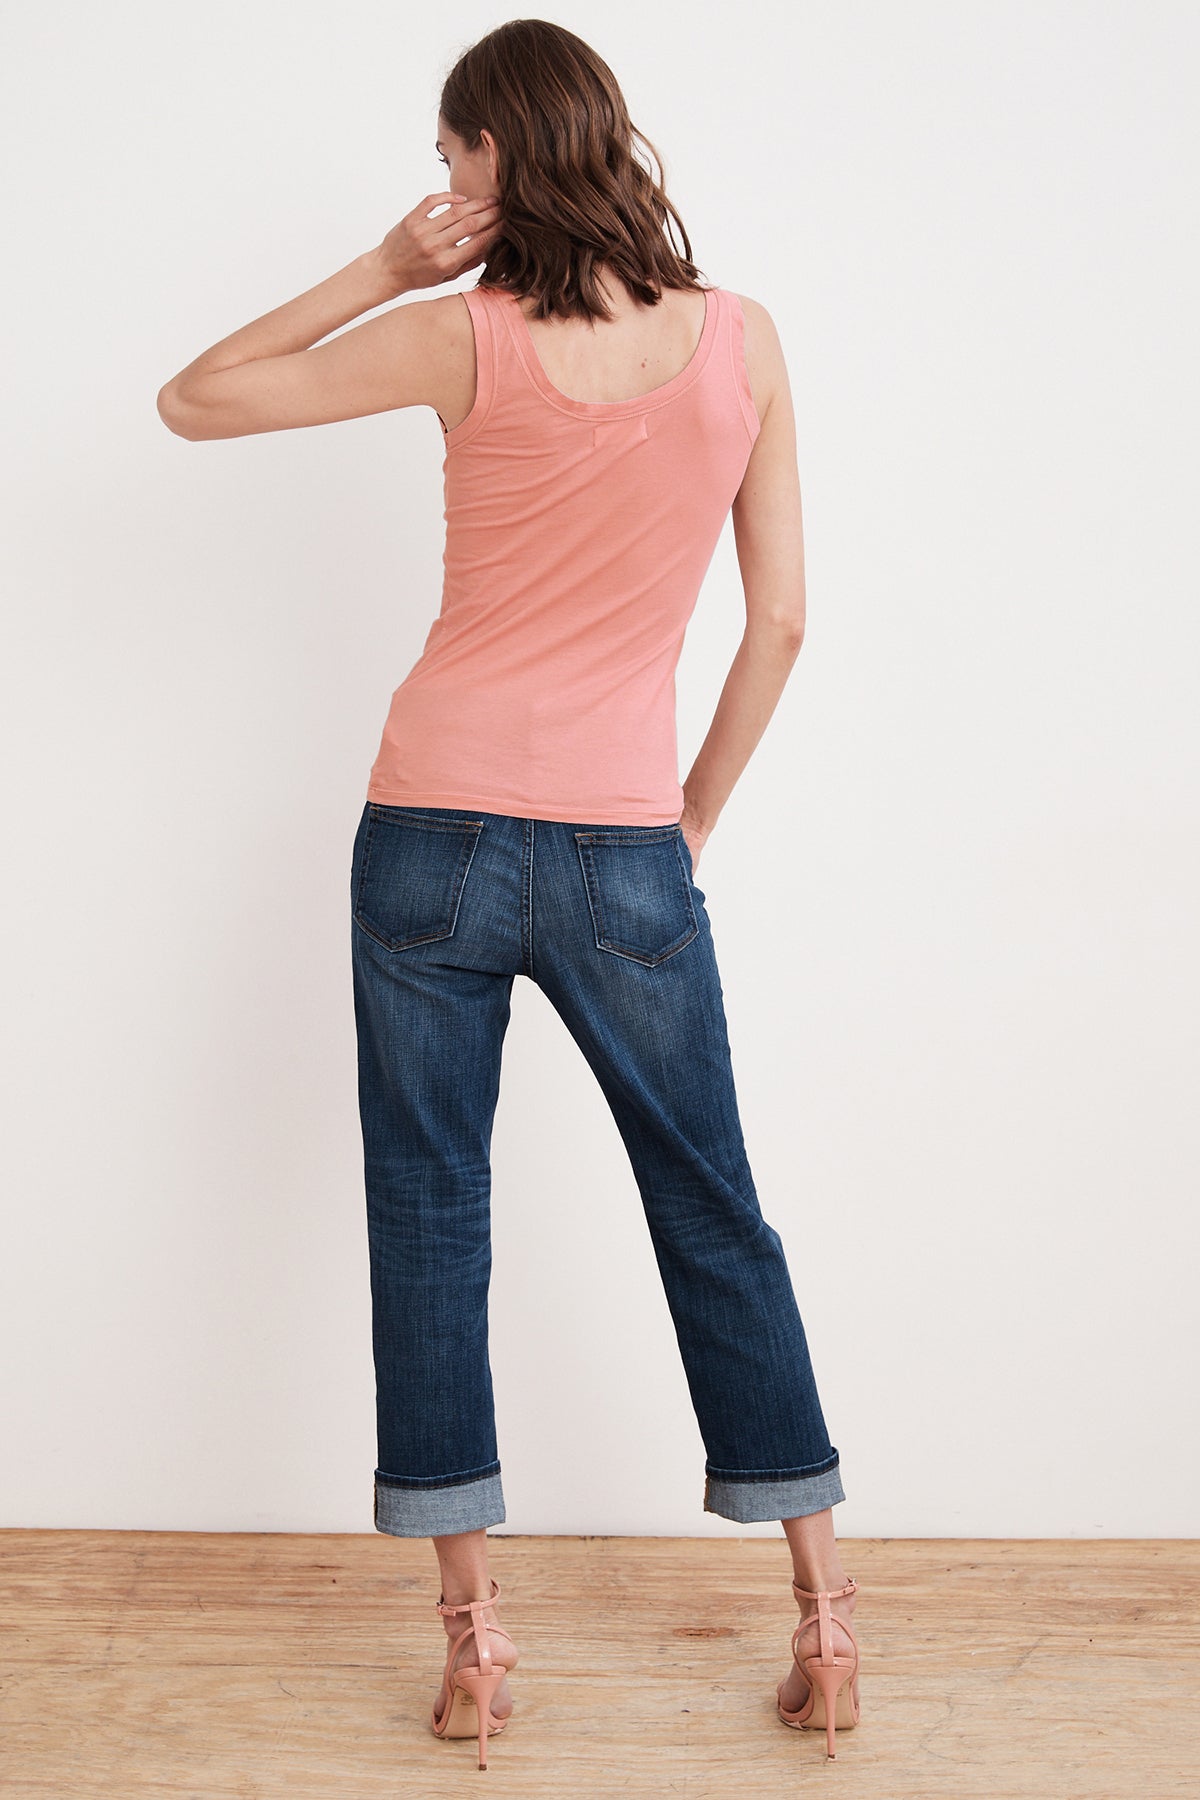 A woman wearing a MOSSY GAUZY WHISPER FITTED TANK in pink, perfect for warmer days paired with jeans for a trendy layering look by Velvet by Graham & Spencer.-1675916476497